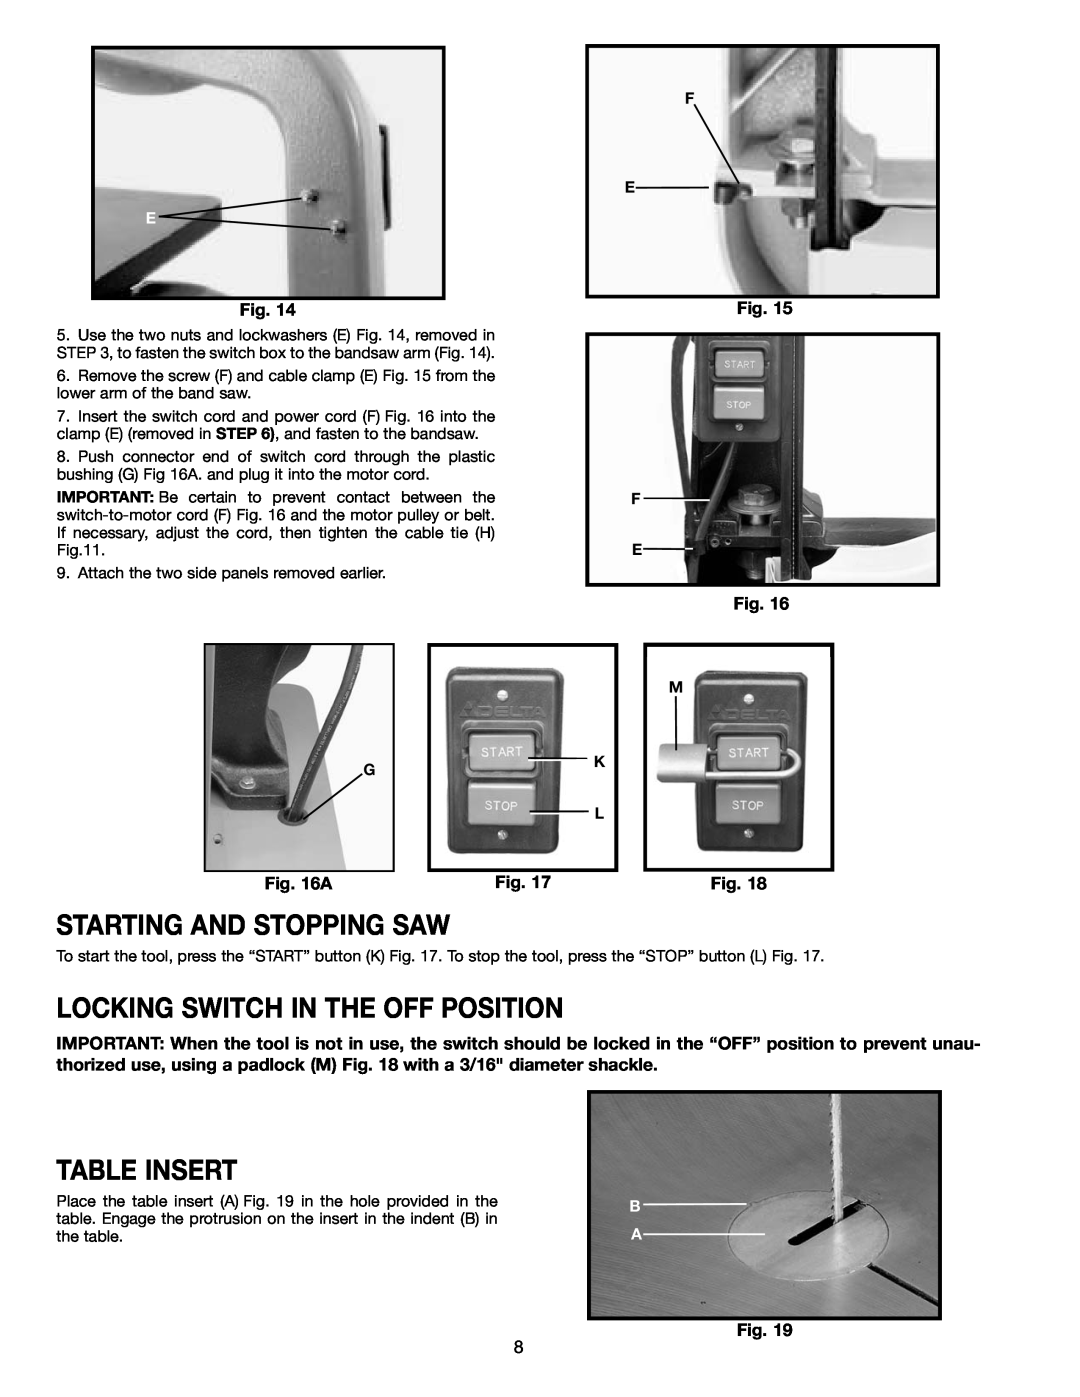 Delta 28-299A, 28-241 instruction manual Starting And Stopping Saw, Locking Switch In The Off Position, Table Insert 